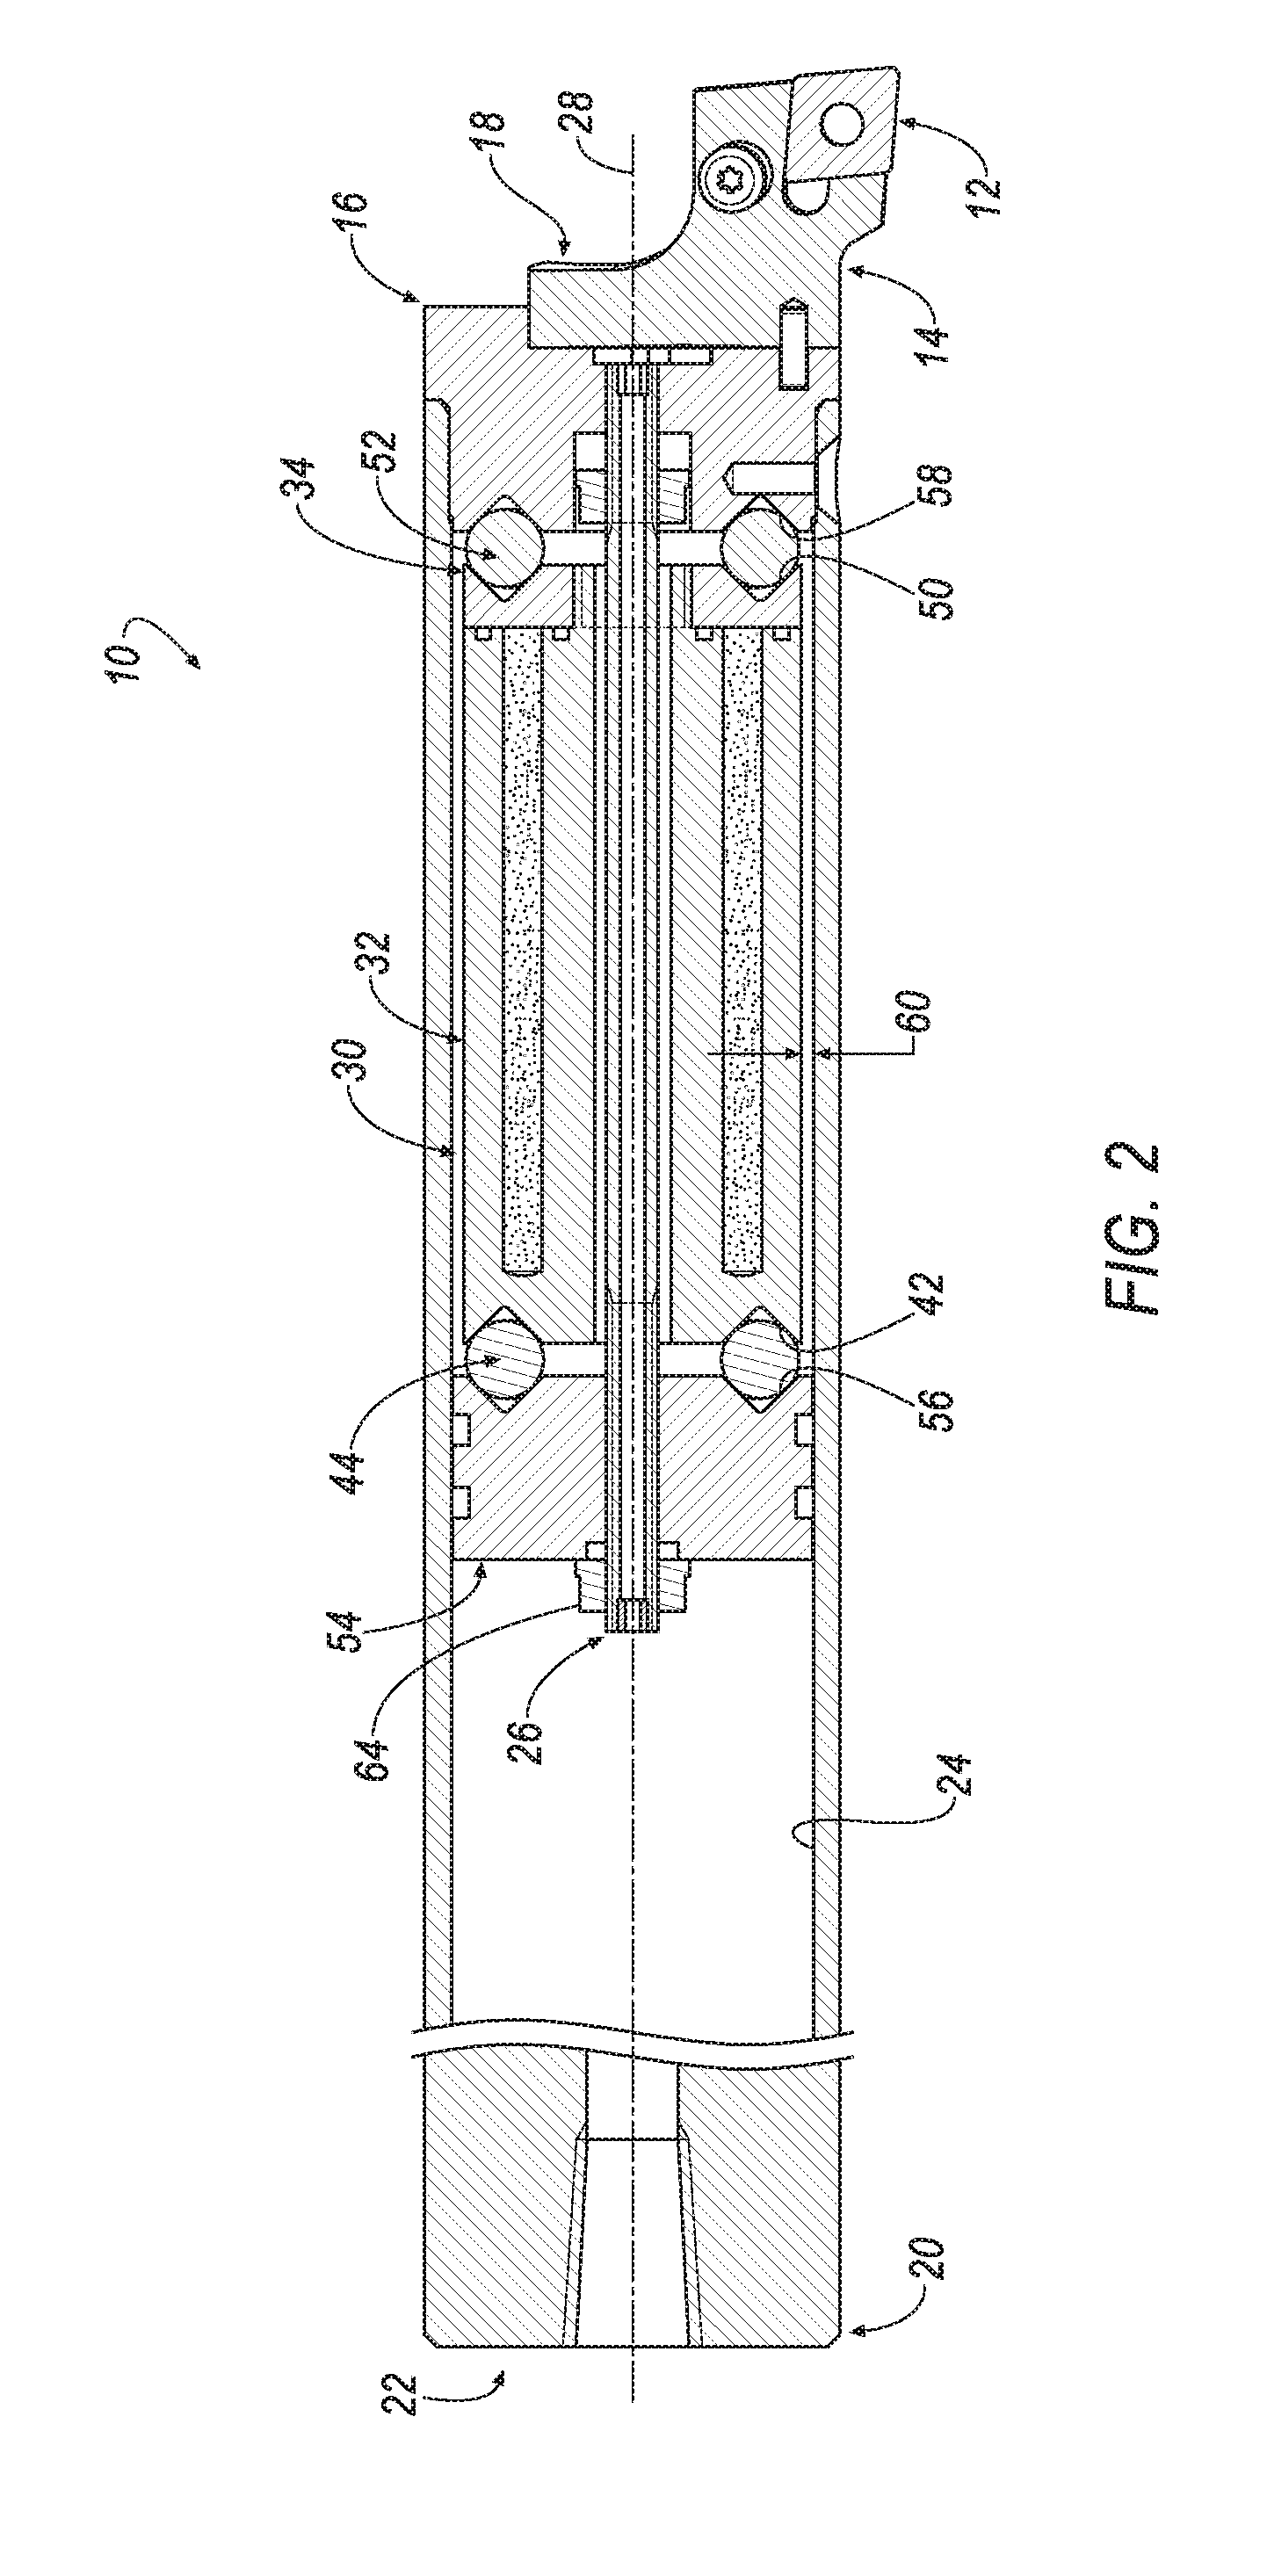 Toolholder with tunable passive vibration absorber assembly